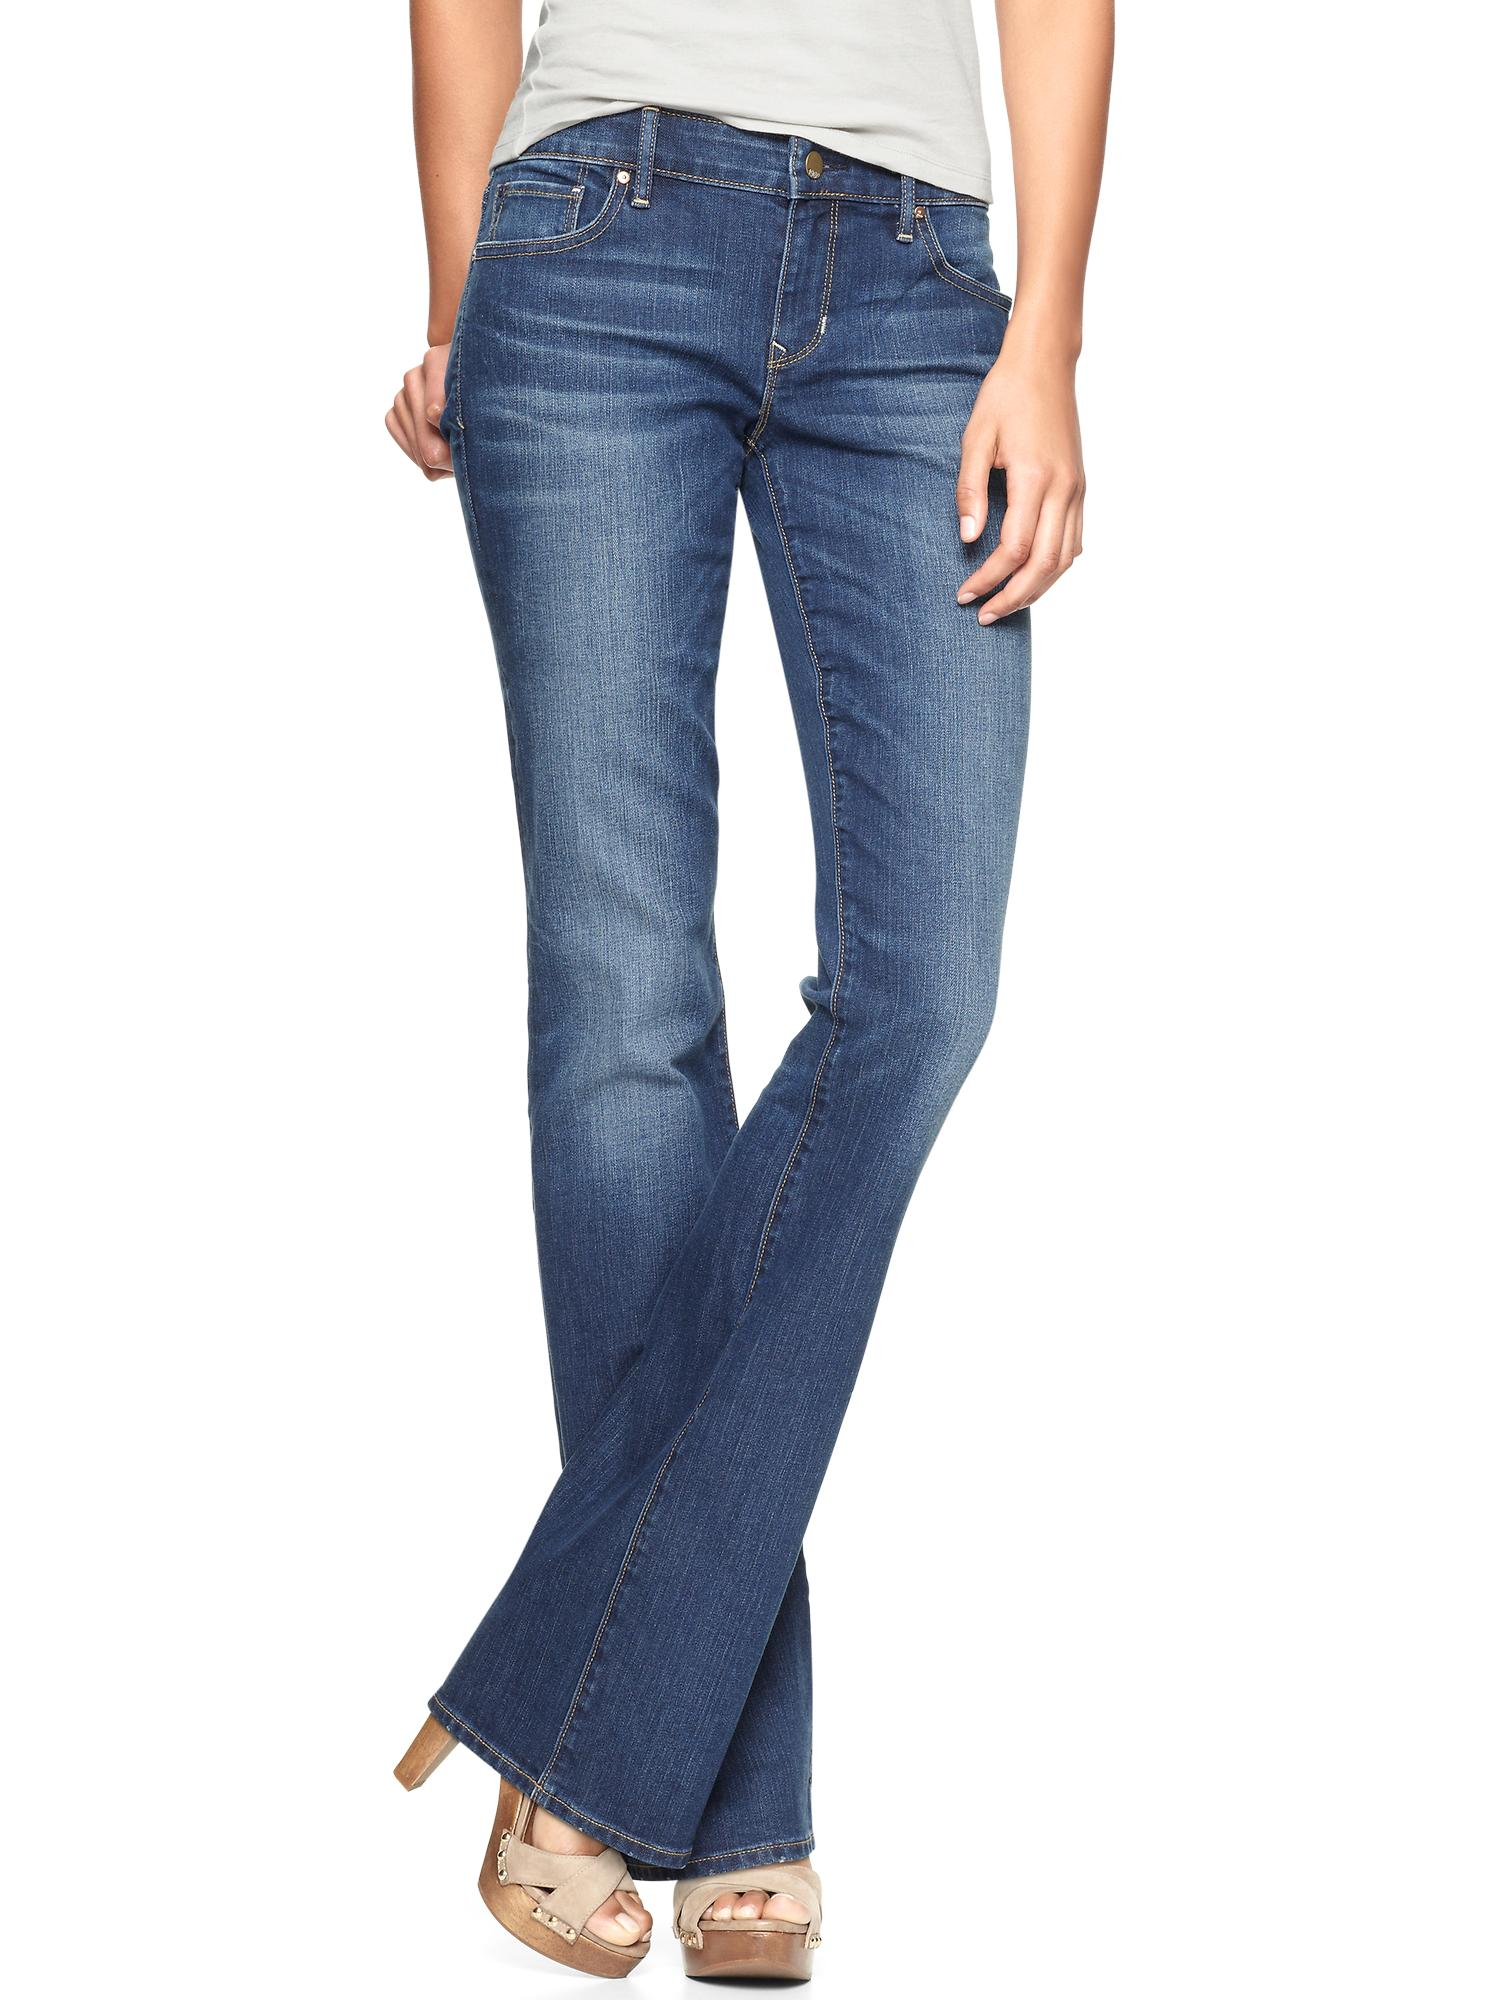 Gap 1969 Sexy Boot Jeans in Blue - Lyst